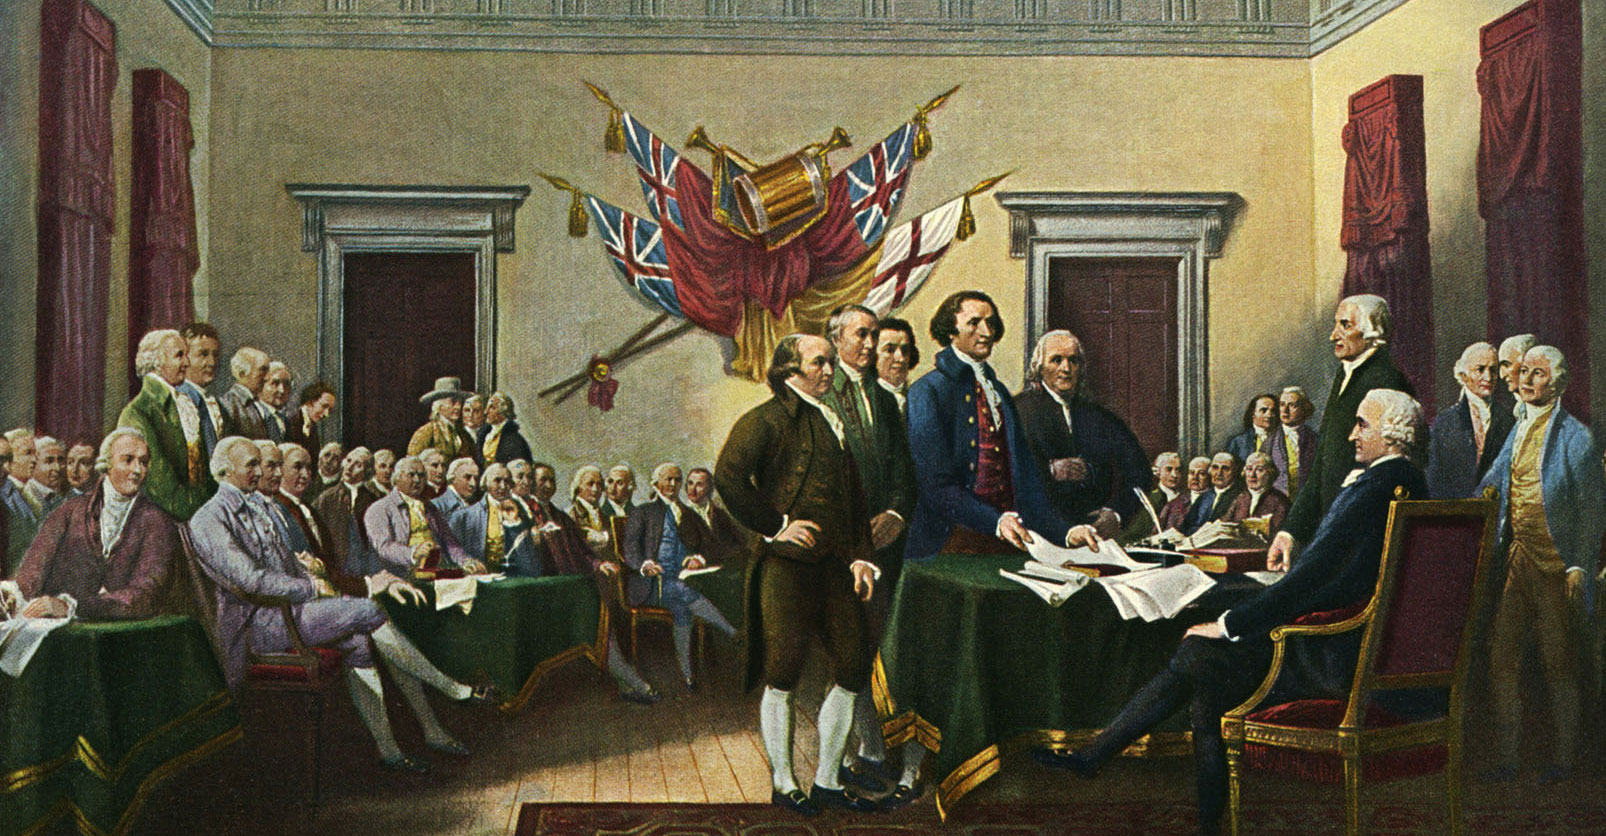 For the 4th of July, Reflections on the Meaning of American Citizenship